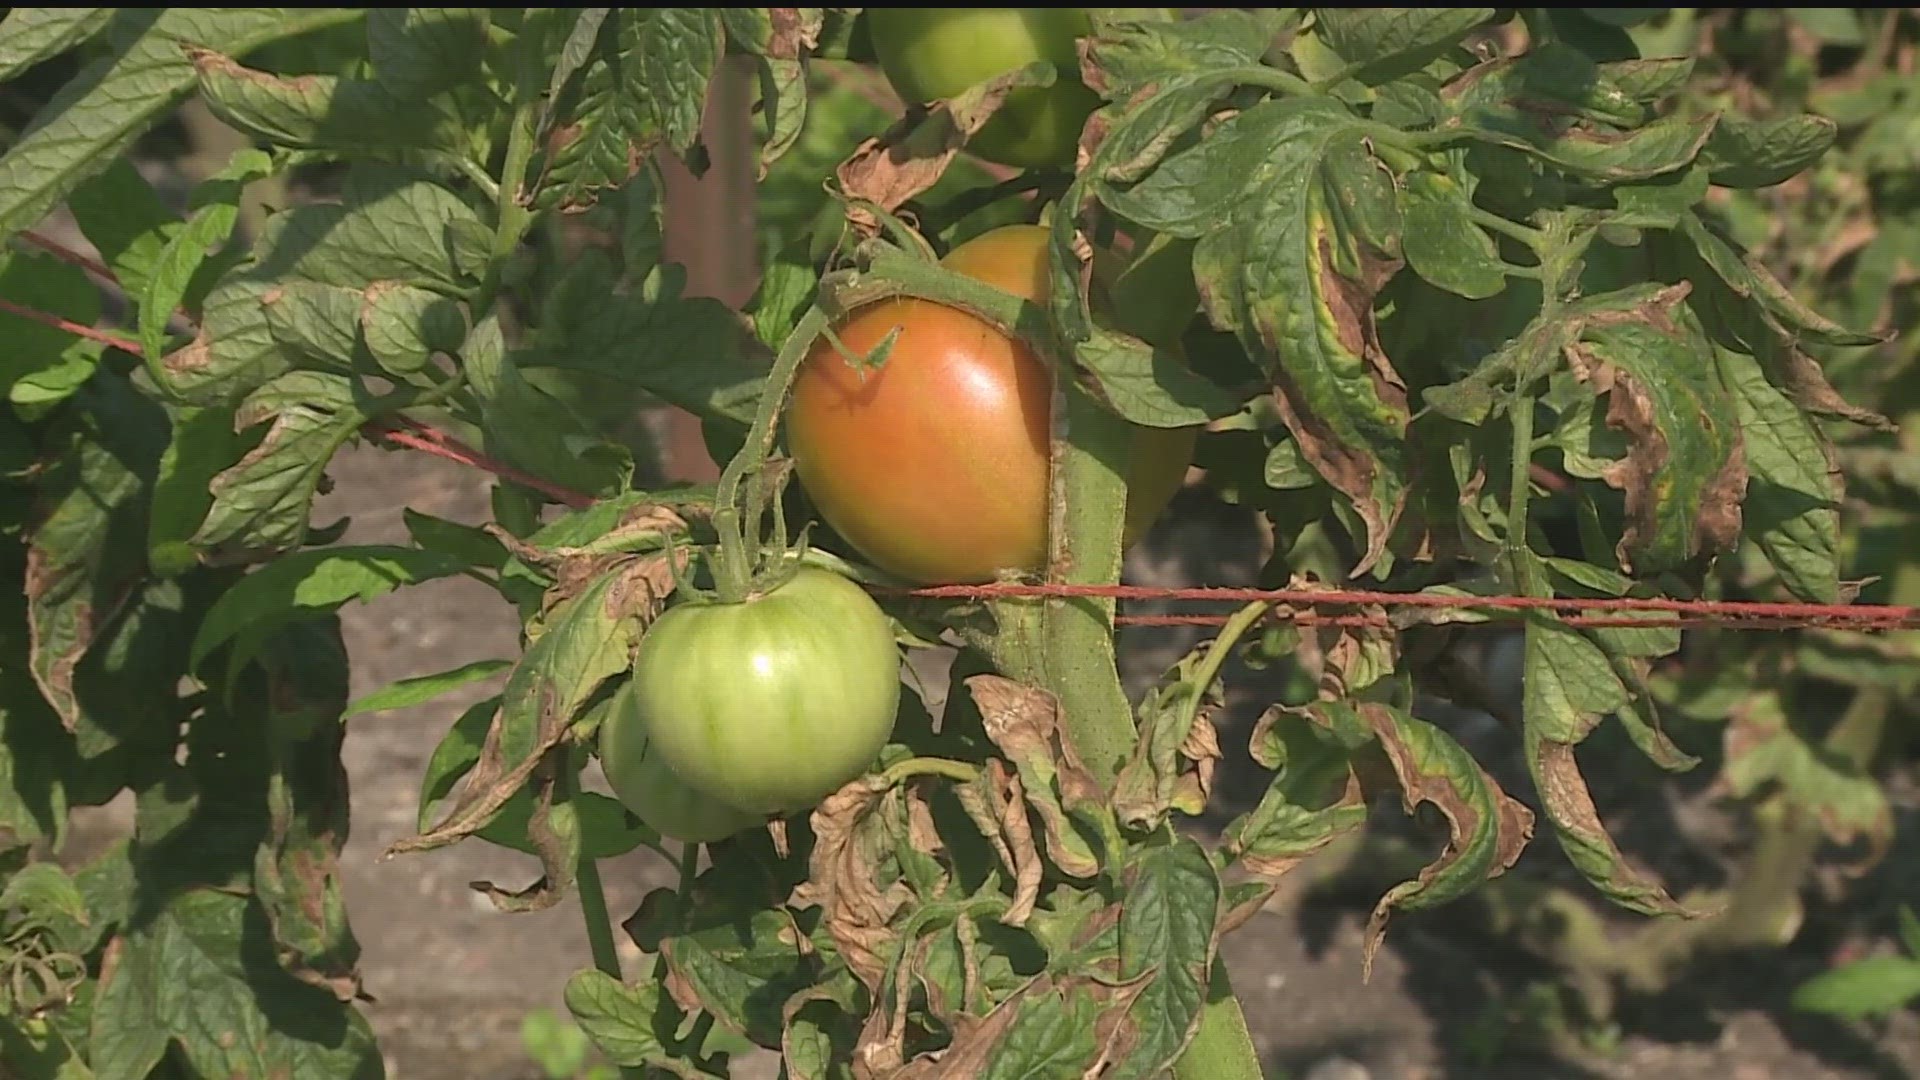 There are ways to get green tomatoes on your plants to ripen faster with the end of the growing season approaching.